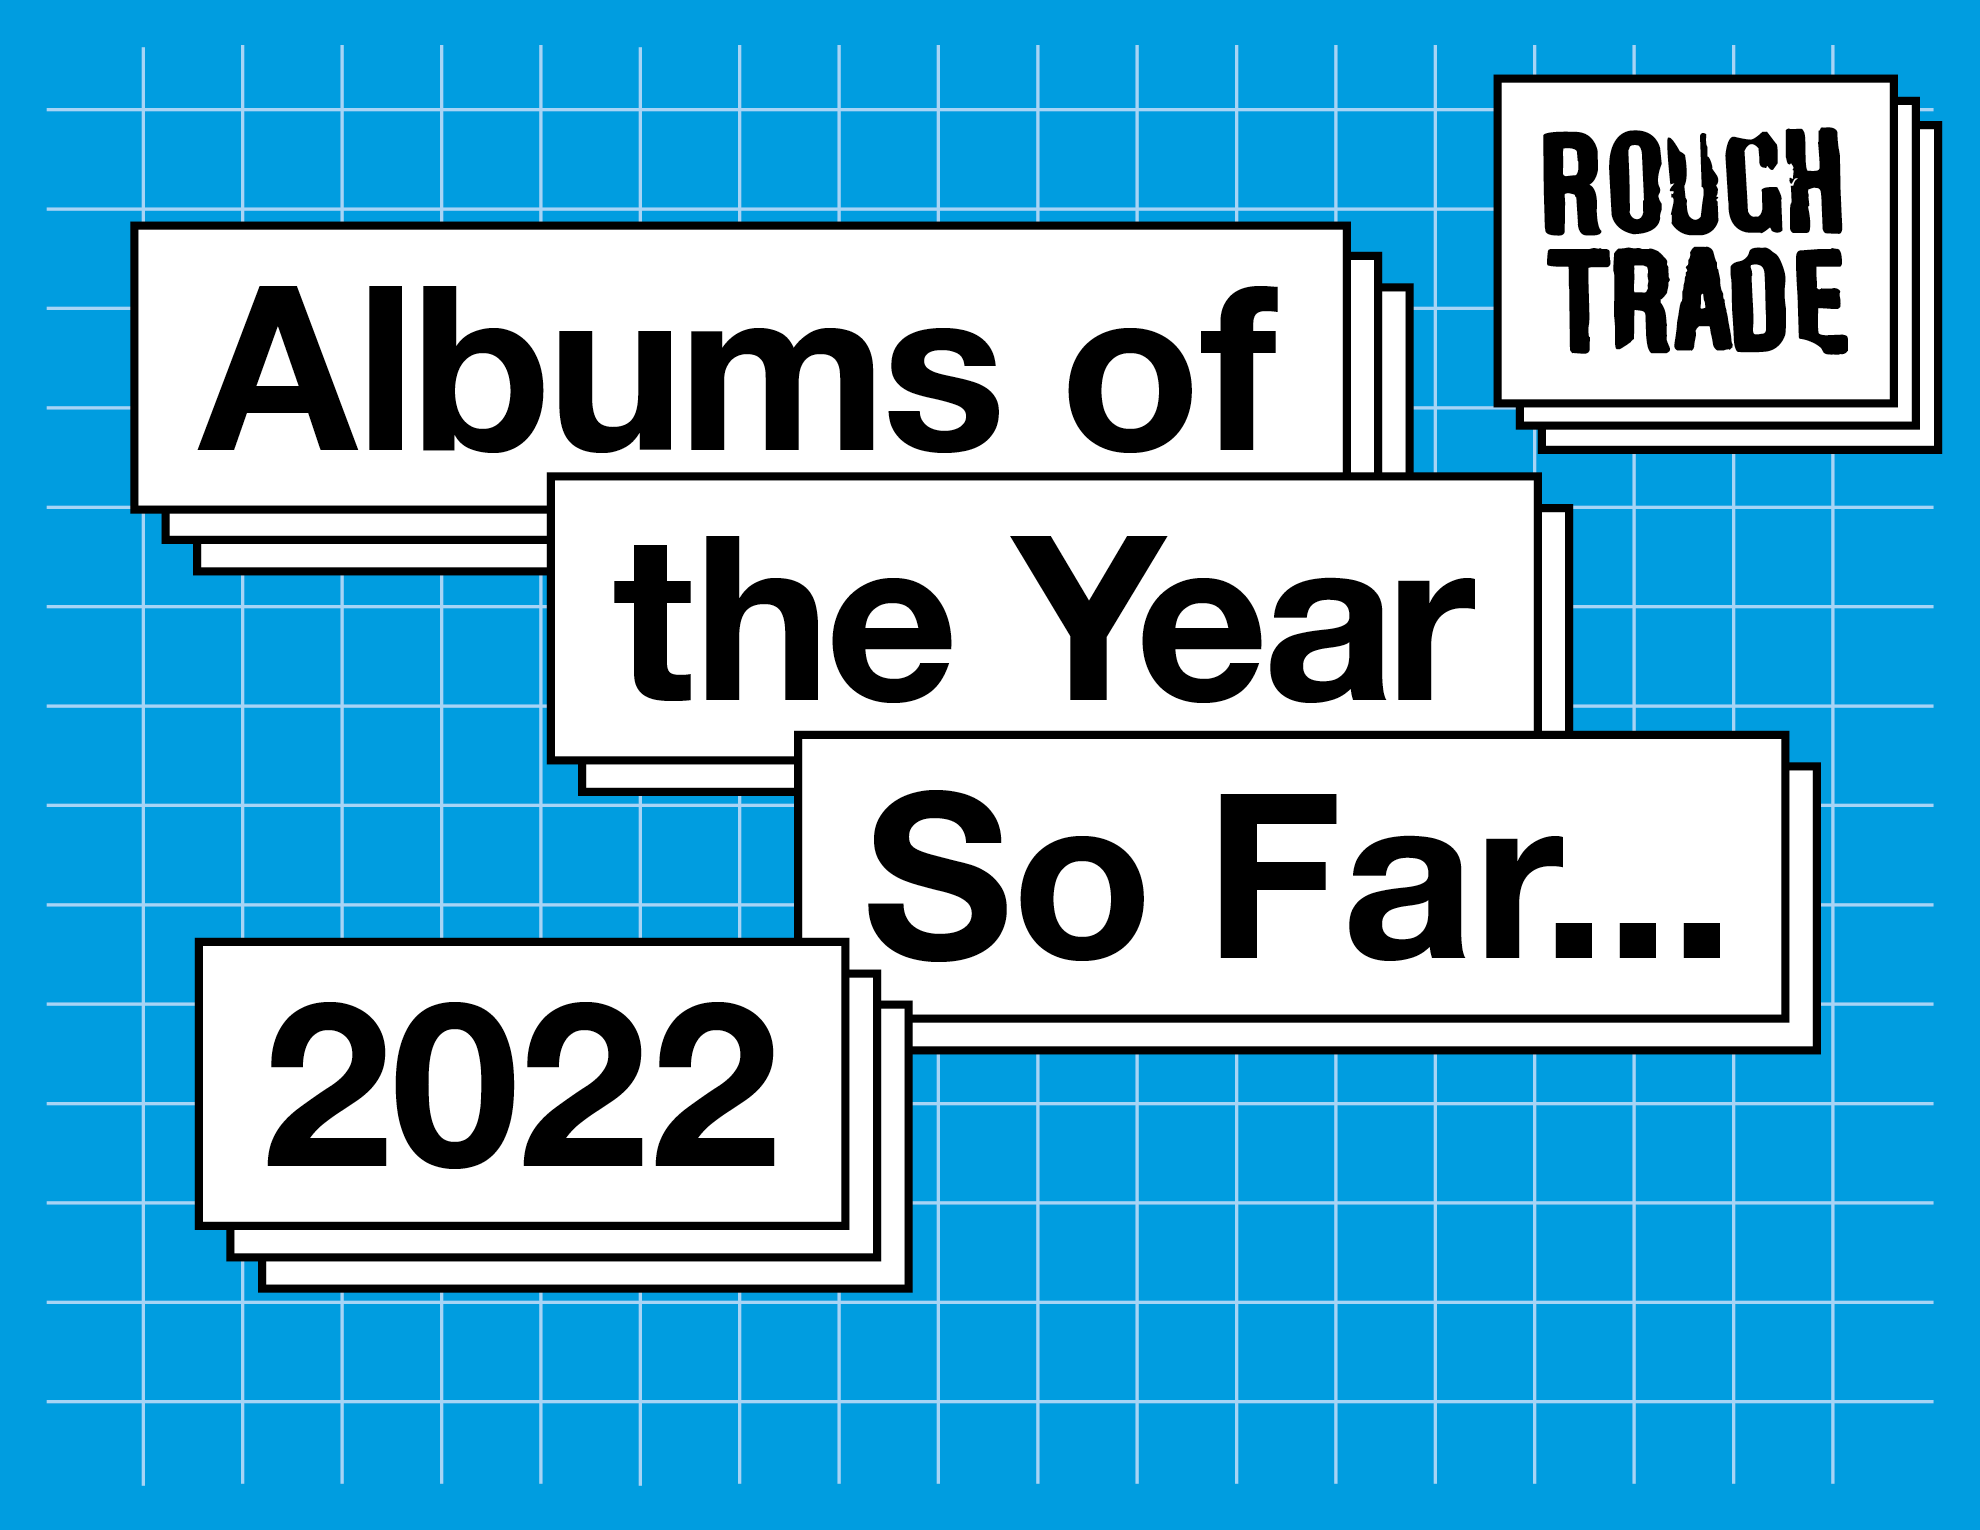 Albums of The Year So Far 2022